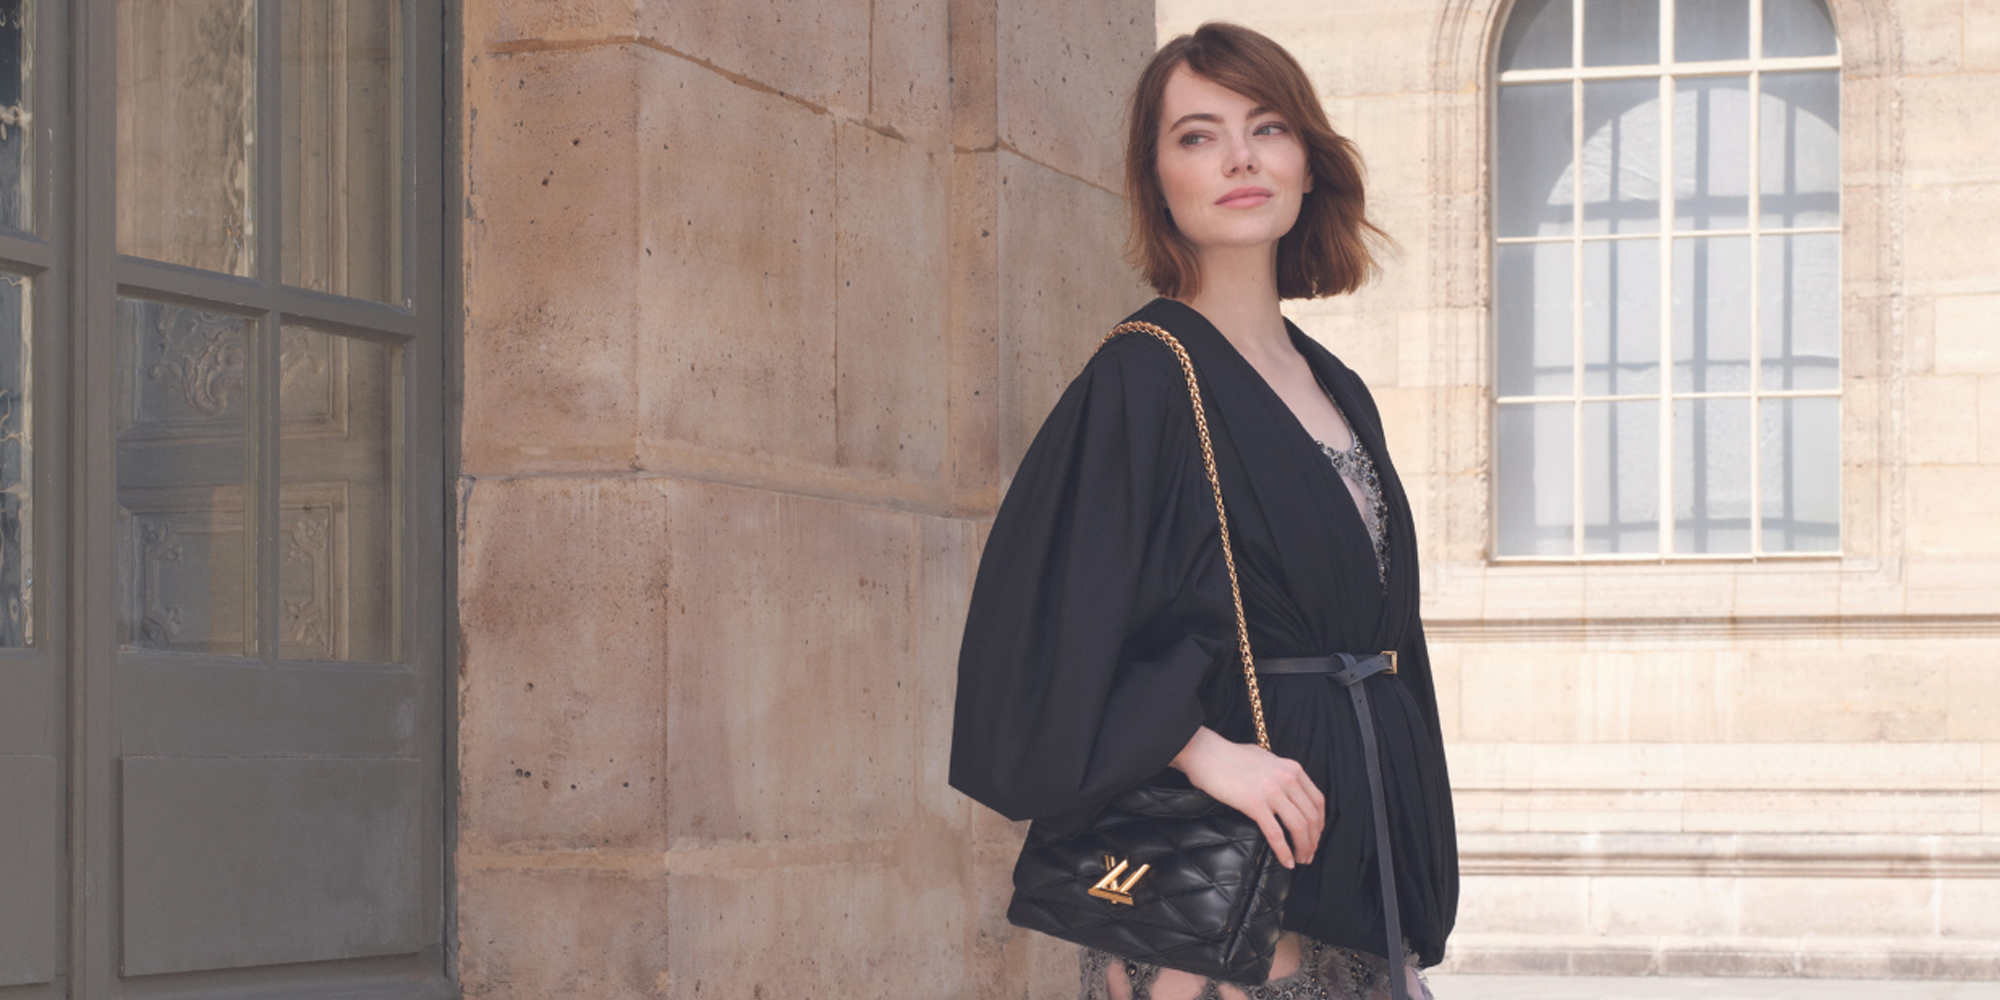 Louis Vuitton unveils new accessories campaign featuring Emma